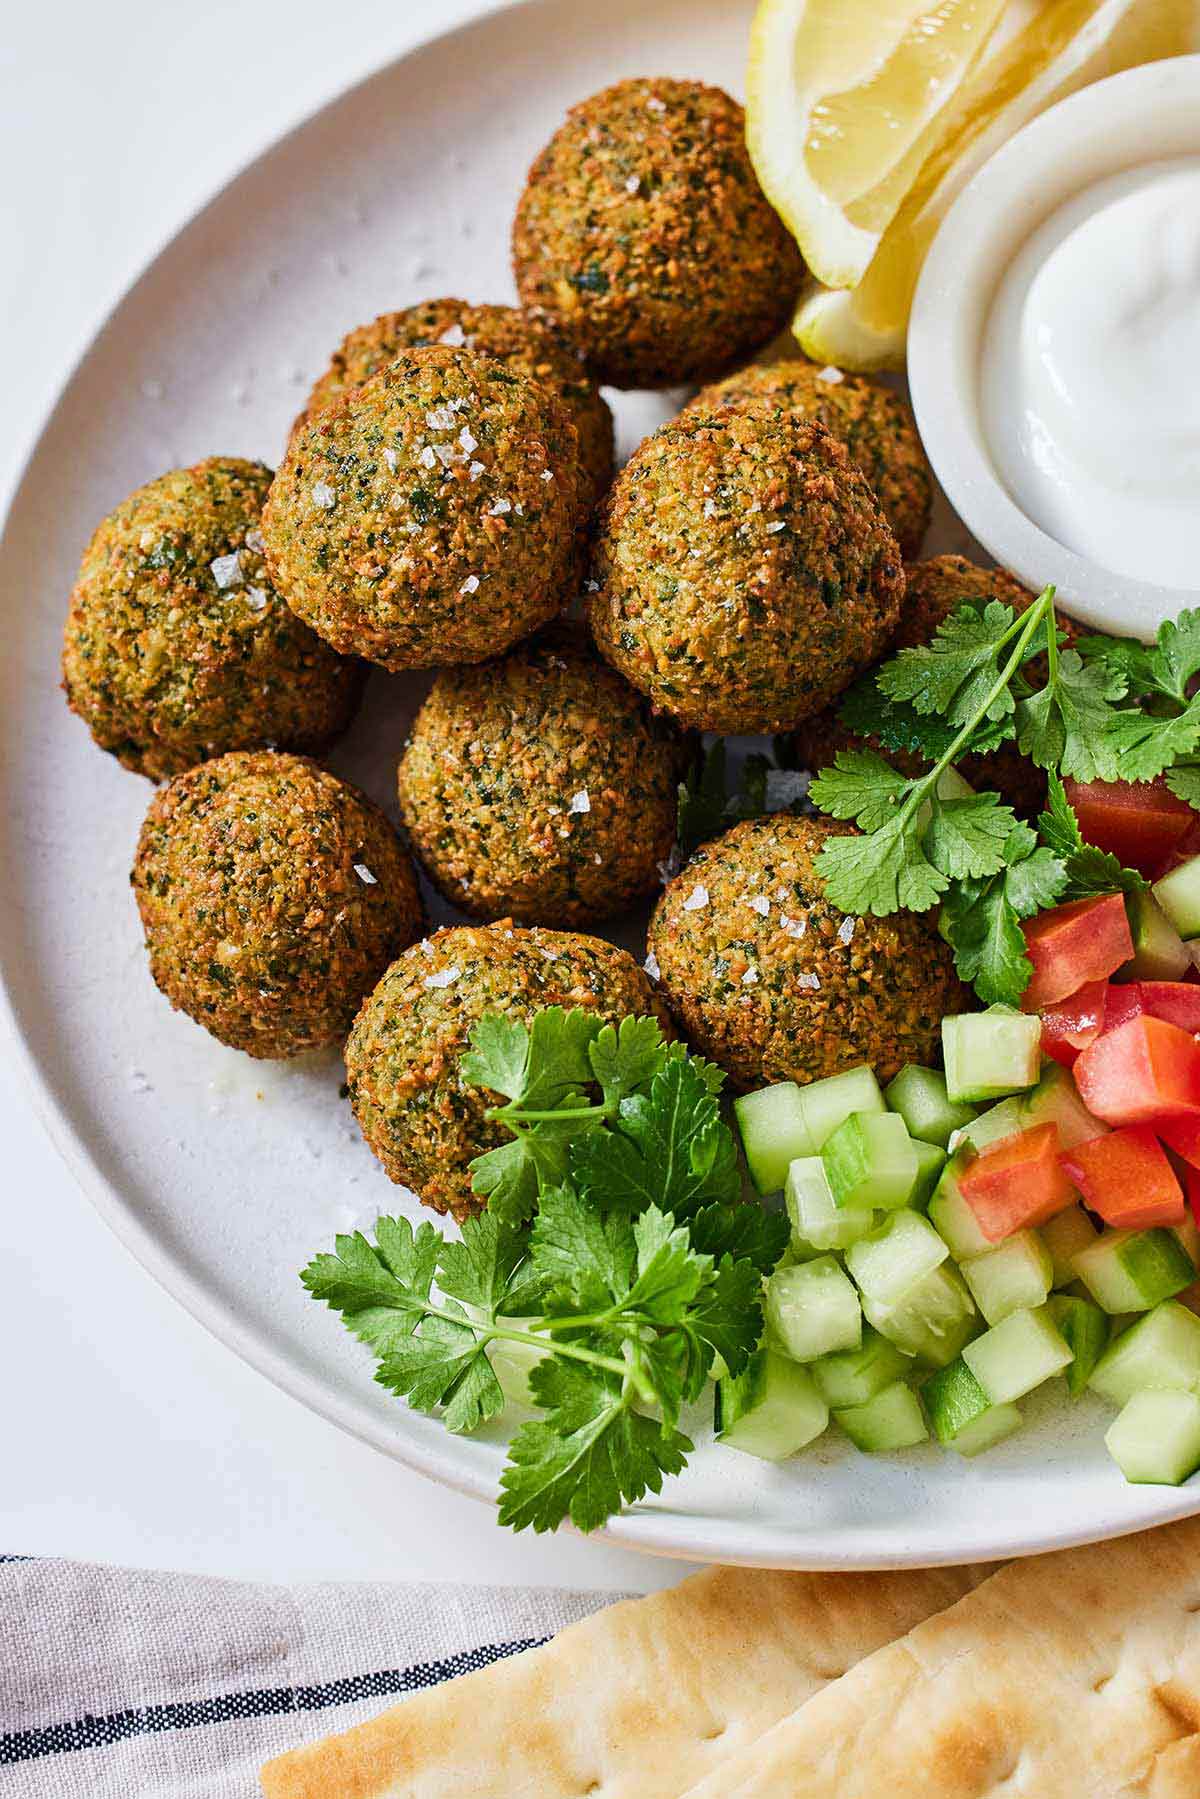 A plate with multiple falafels alongside fresh herbs, cucumbers, lemon wedges, and dip.